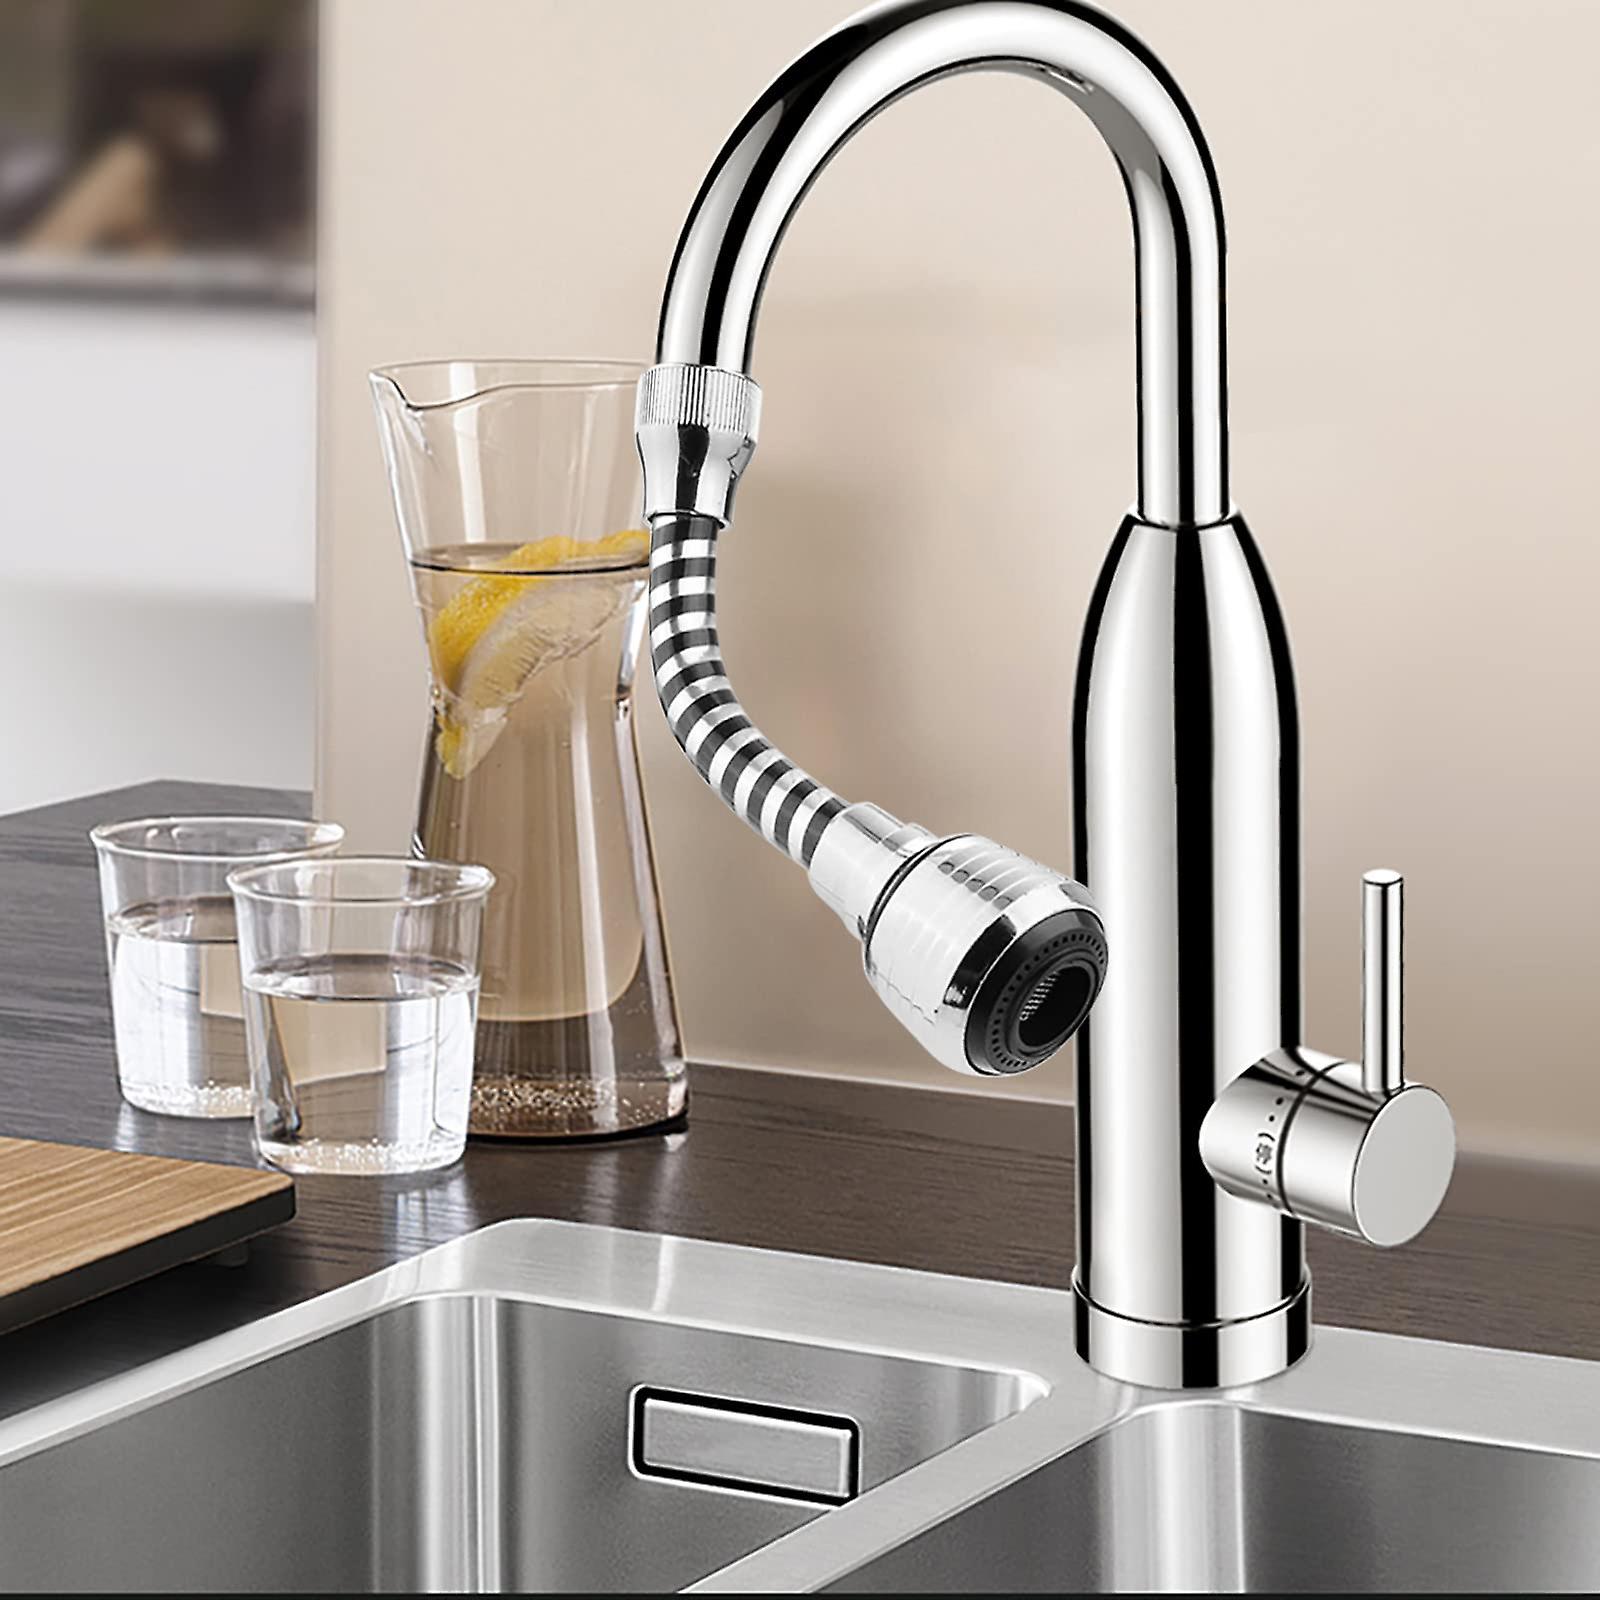 14 Amazing Sink Faucet With Sprayer For 2023 1692840800 